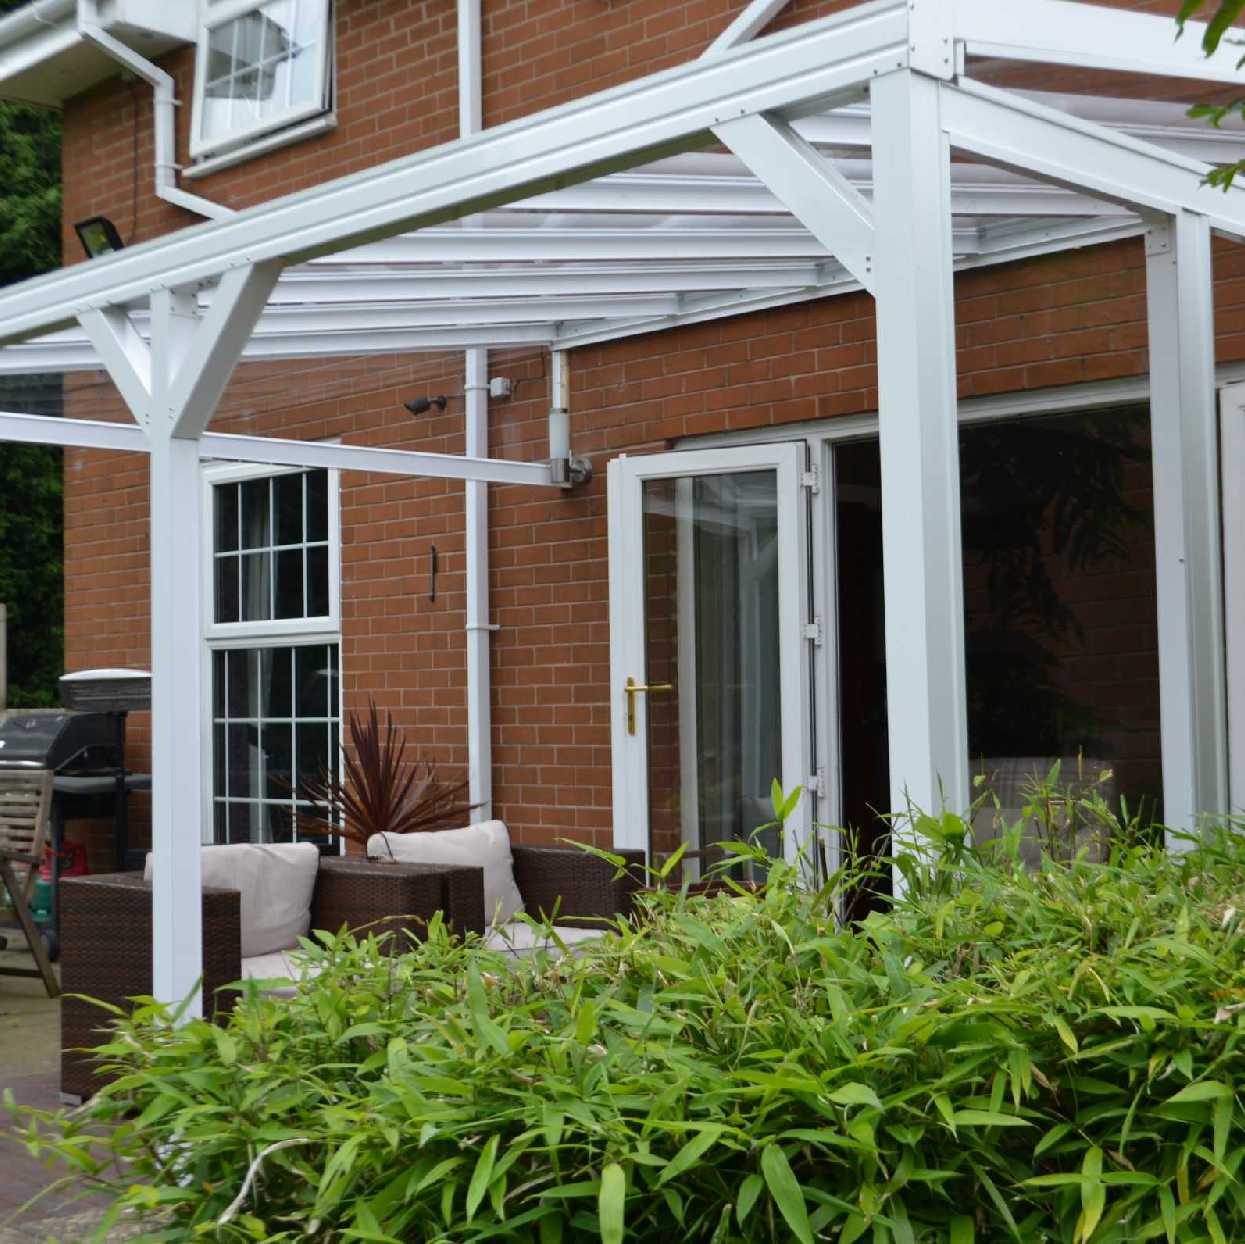 Omega Smart Lean-To Canopy, White UNGLAZED for 6mm Glazing - 2.1m (W) x 2.0m (P), (2) Supporting Posts from Omega Build